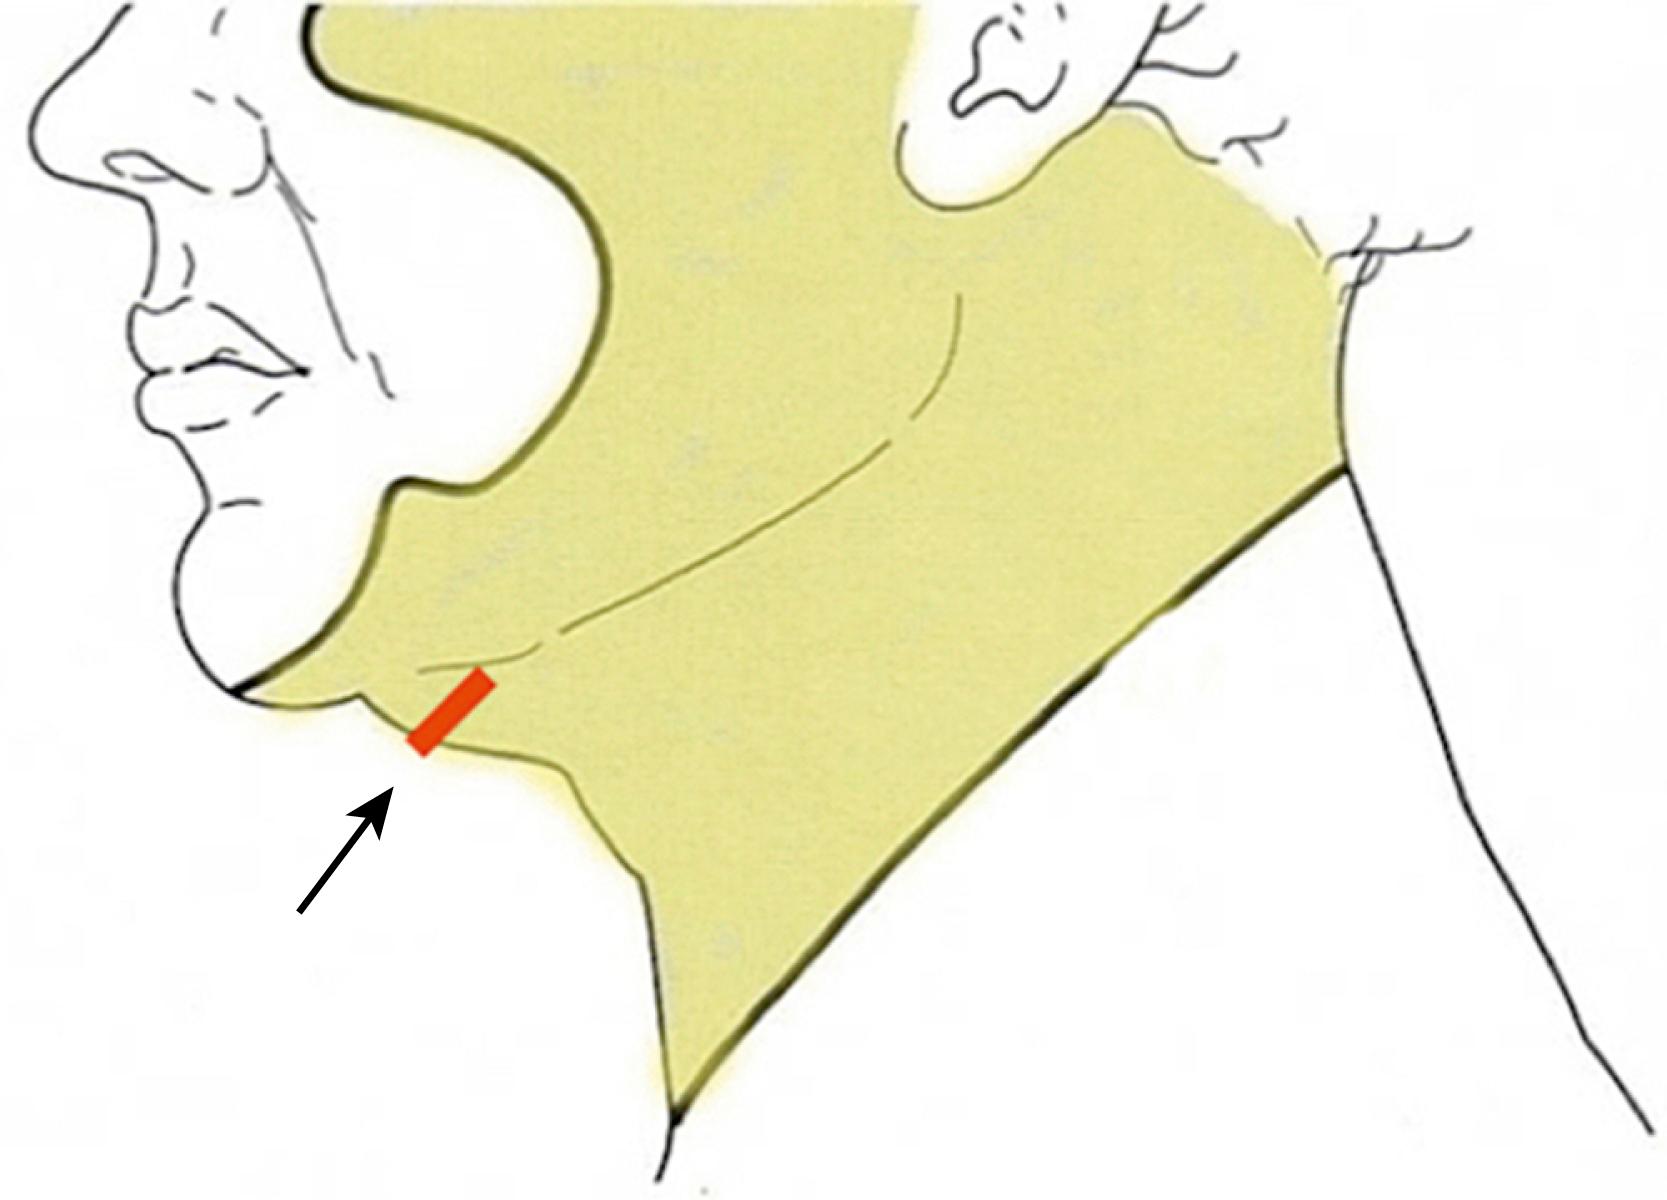 Fig. 67.14, Correct location for the submental incision. Placing the submental incision 1.5 cm posterior to the submental crease ( arrow ) prevents accentuation of the “double chin” and “witch’s chin” deformities and provides for easier dissection and suturing in the anterior neck (compare with Fig. 67.10 ). Note that this incision plan allows the submental crease to be undermined and submental retaining ligaments to be released, and the fat of the chin pad and neck to be blended to create a smooth transition between them (see Fig. 67.15 ).